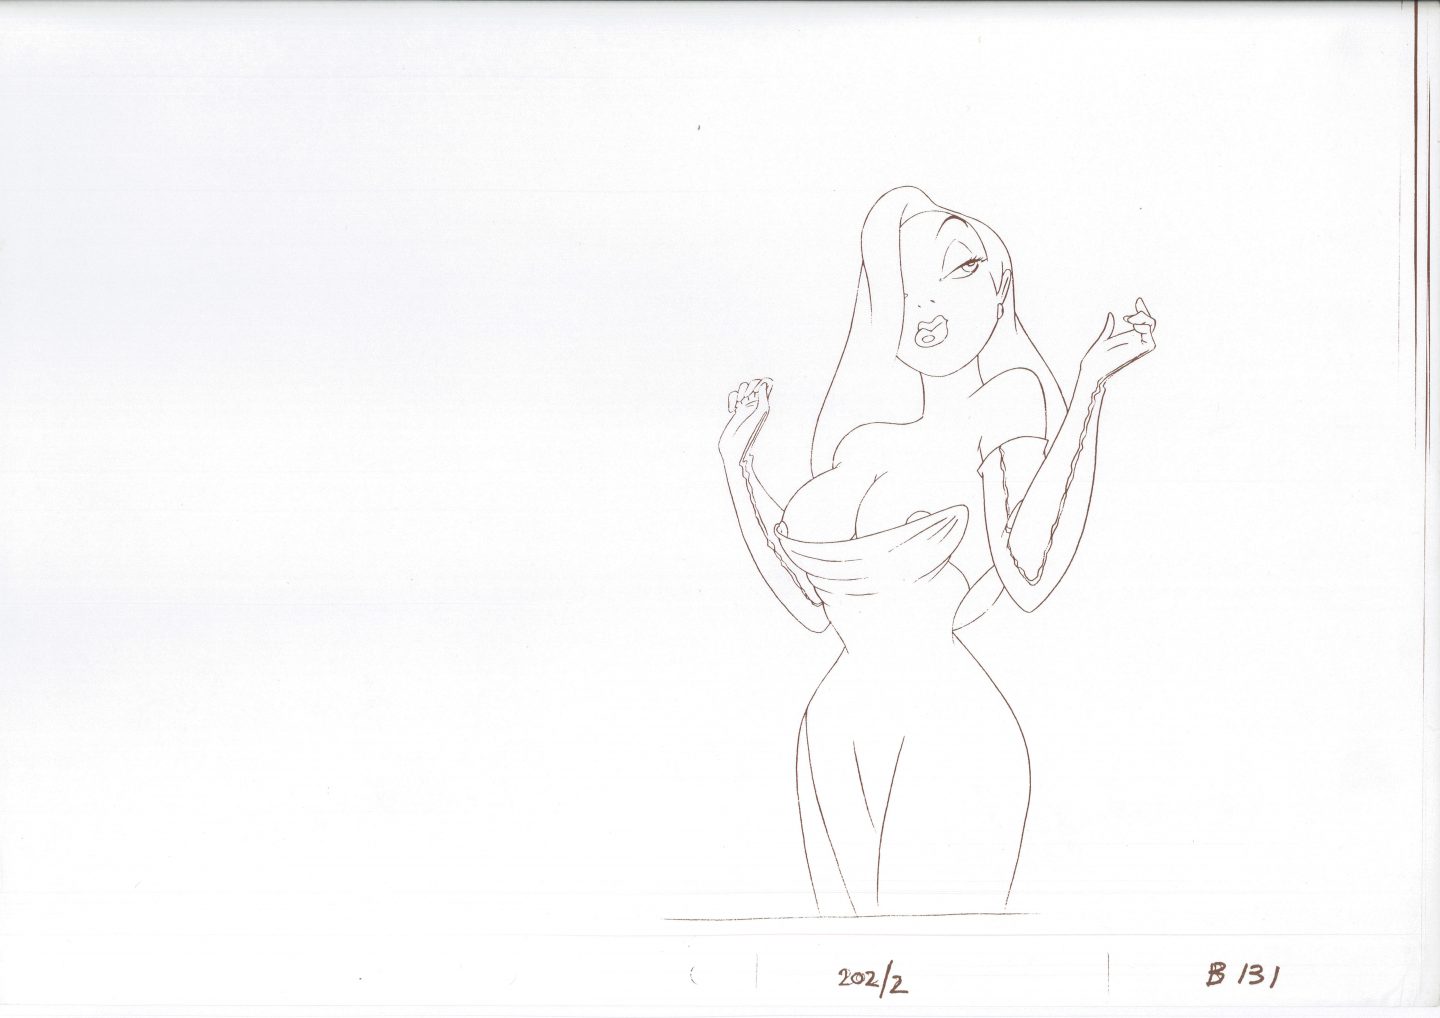 Jessica Rabbit - booby-trap deleted drawing.